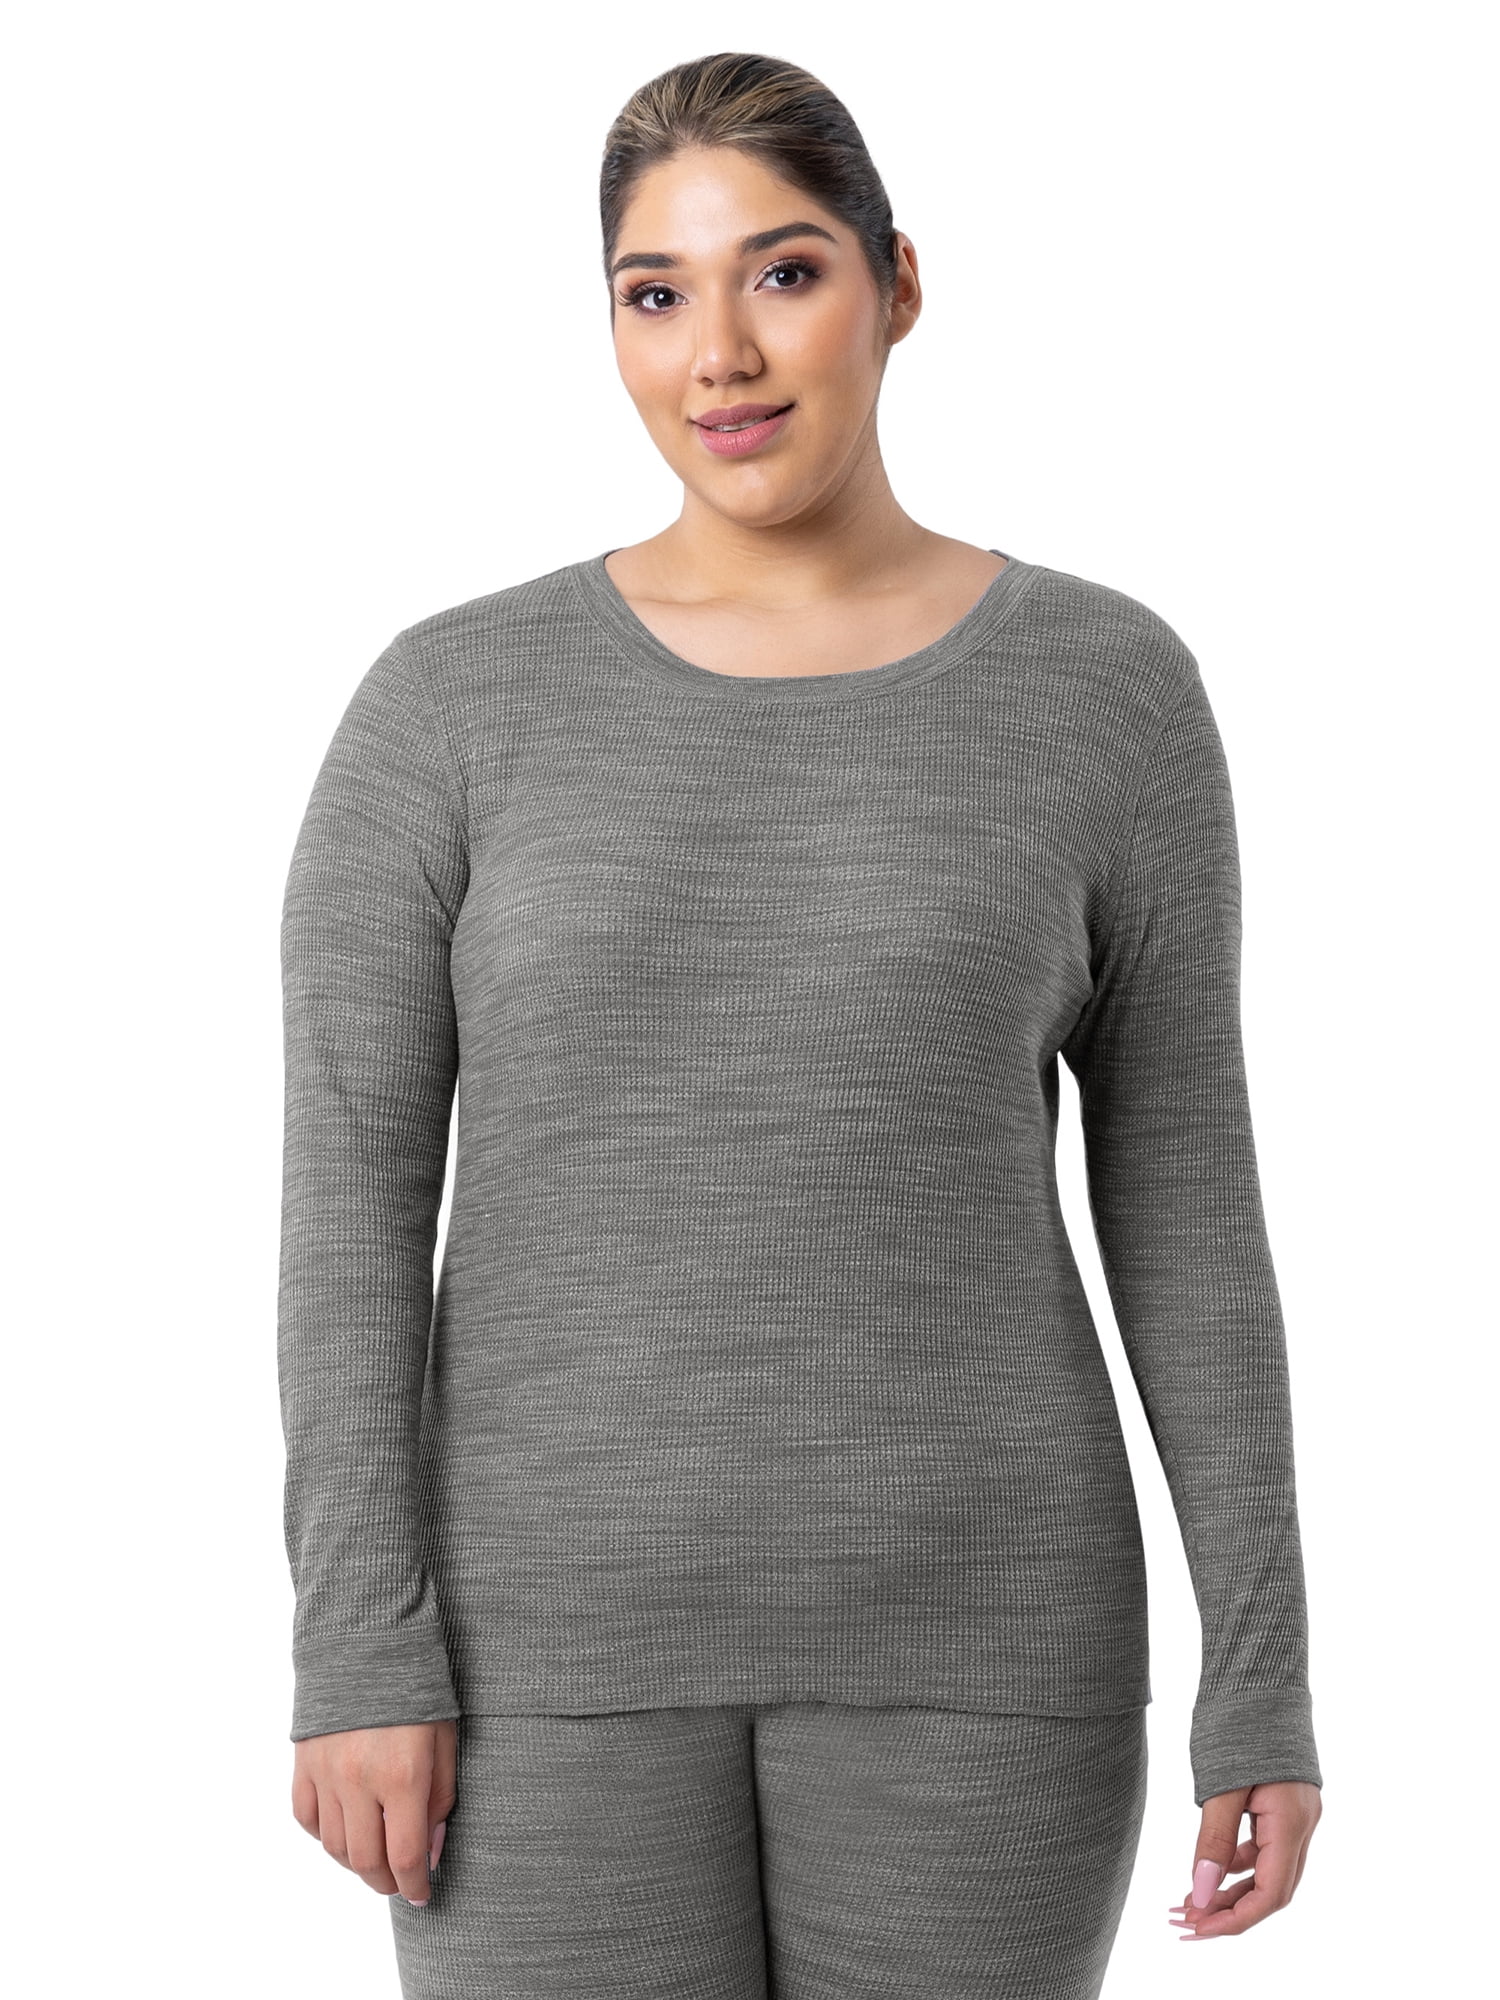 Fruit of the Loom Women's Eversoft Waffle Thermal Top, Sizes XS-XXXL ...